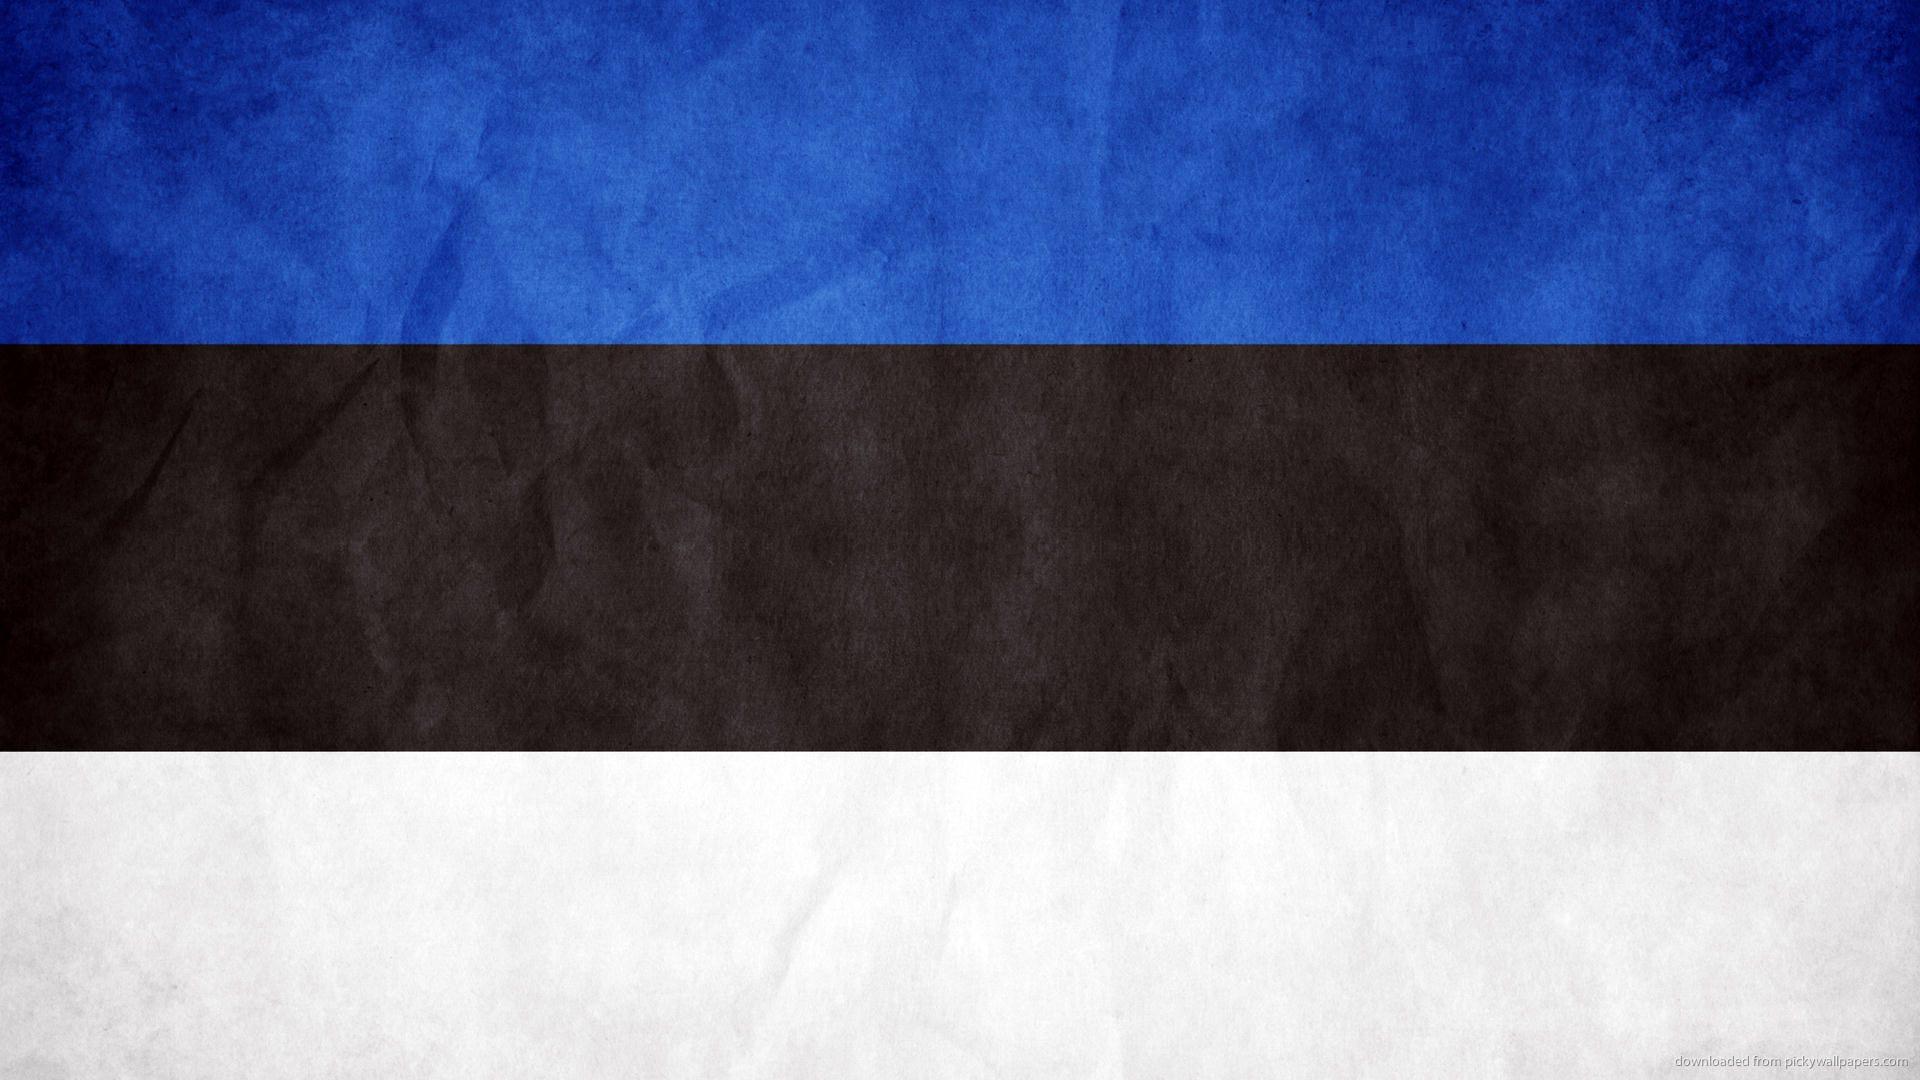 Wallpaper Of The Estonian Country Flag